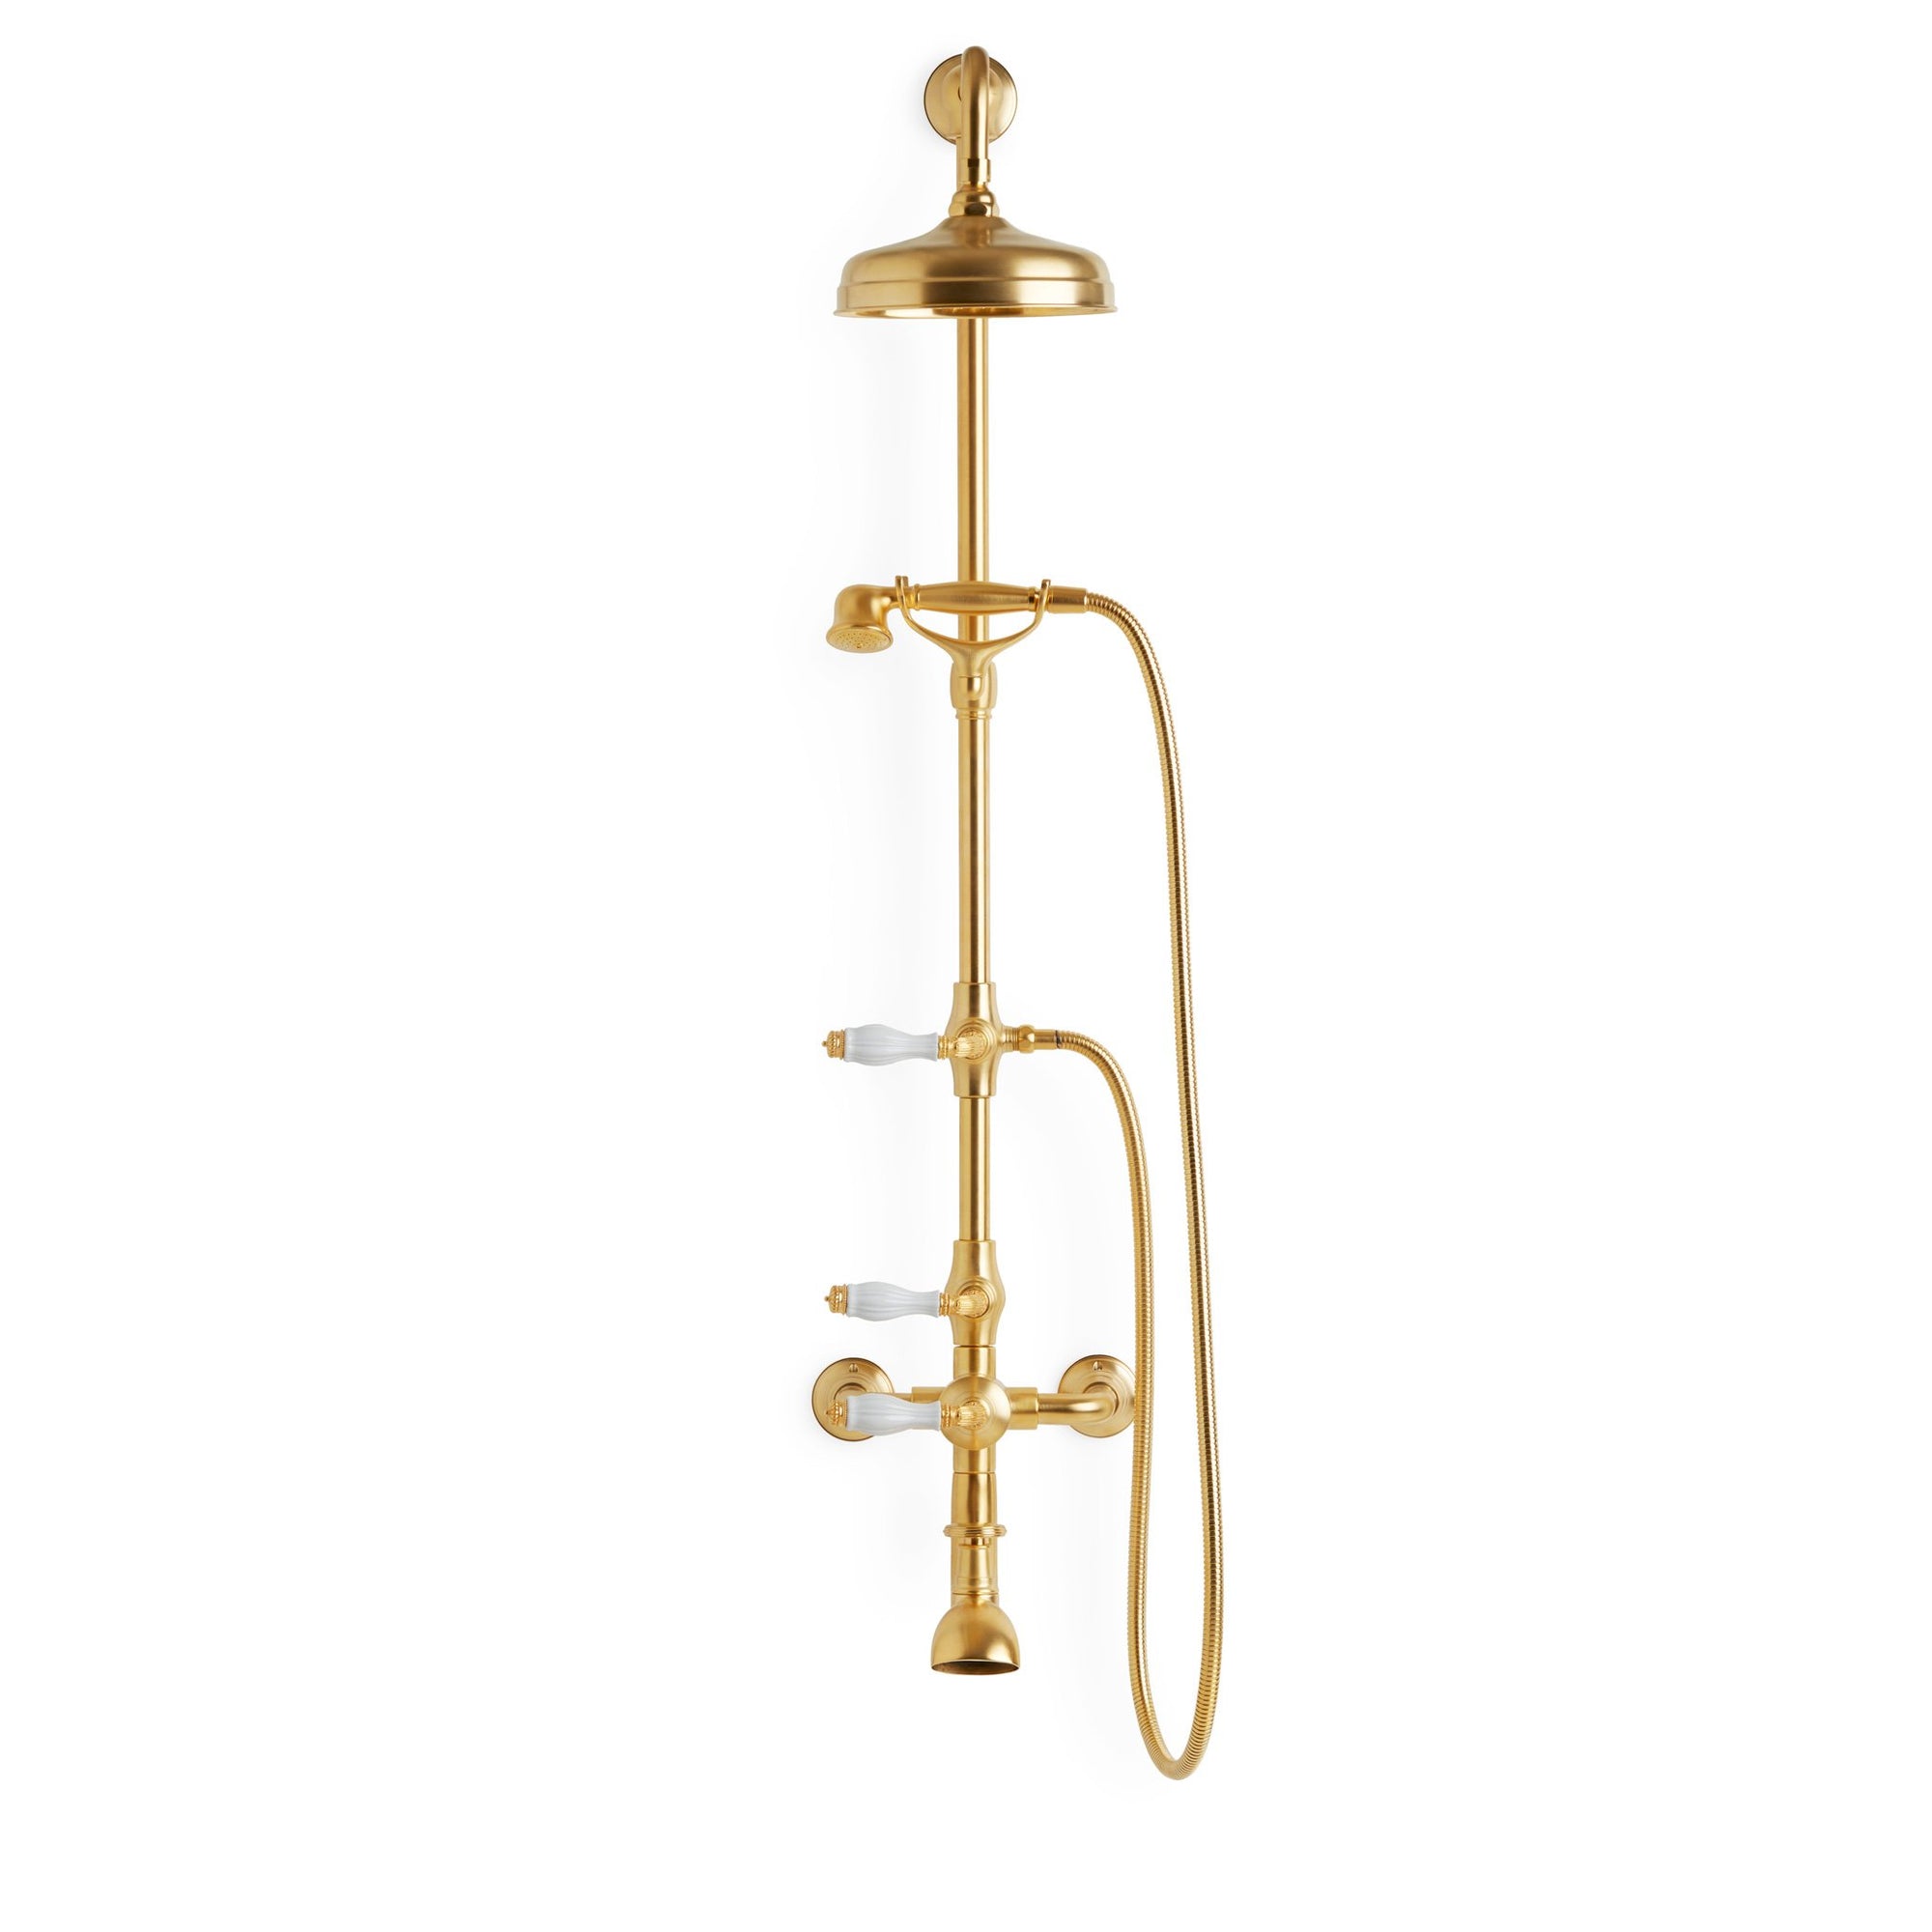 1029XSHR-03WH-GP Sherle Wagner International Scalloped Ceramic Fluted Lever Exposed Shower Set in Gold Plate metal finish with White Glaze inserts